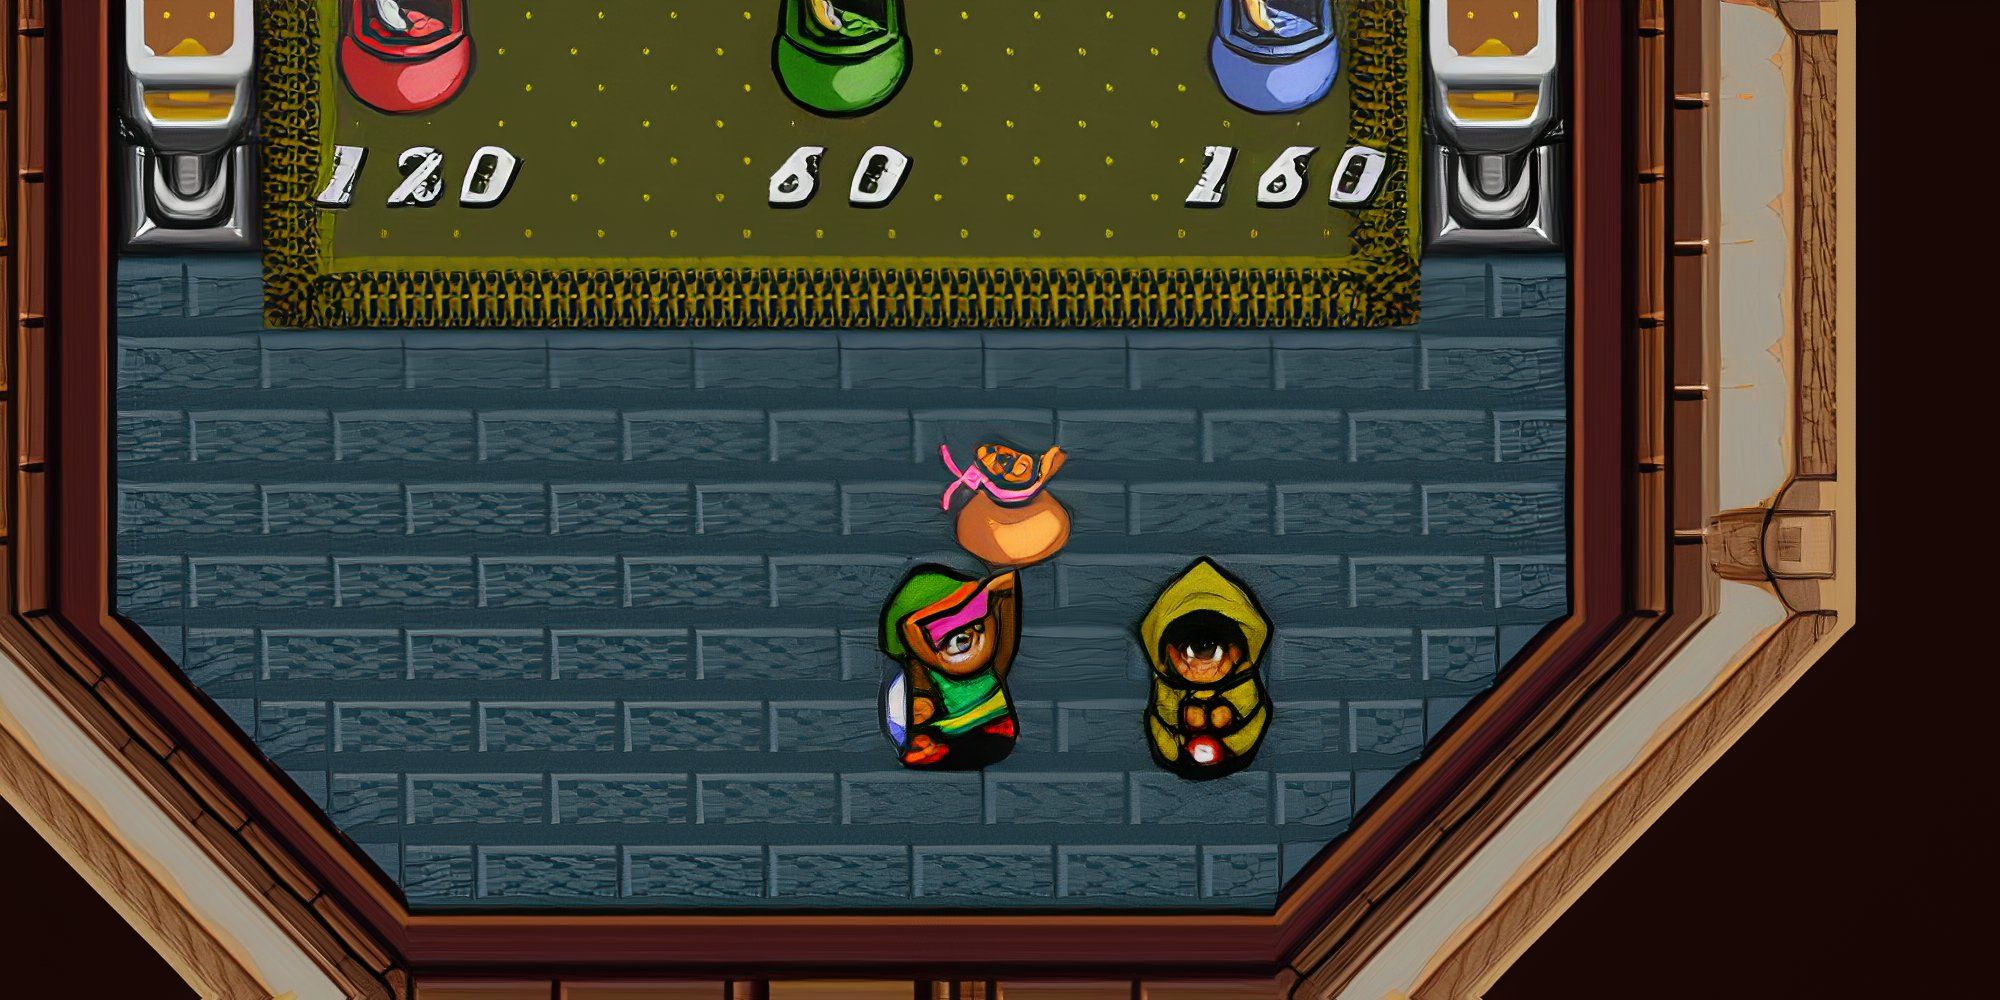 Getting the Magic Powder in The Legend of Zelda A Link to the Past